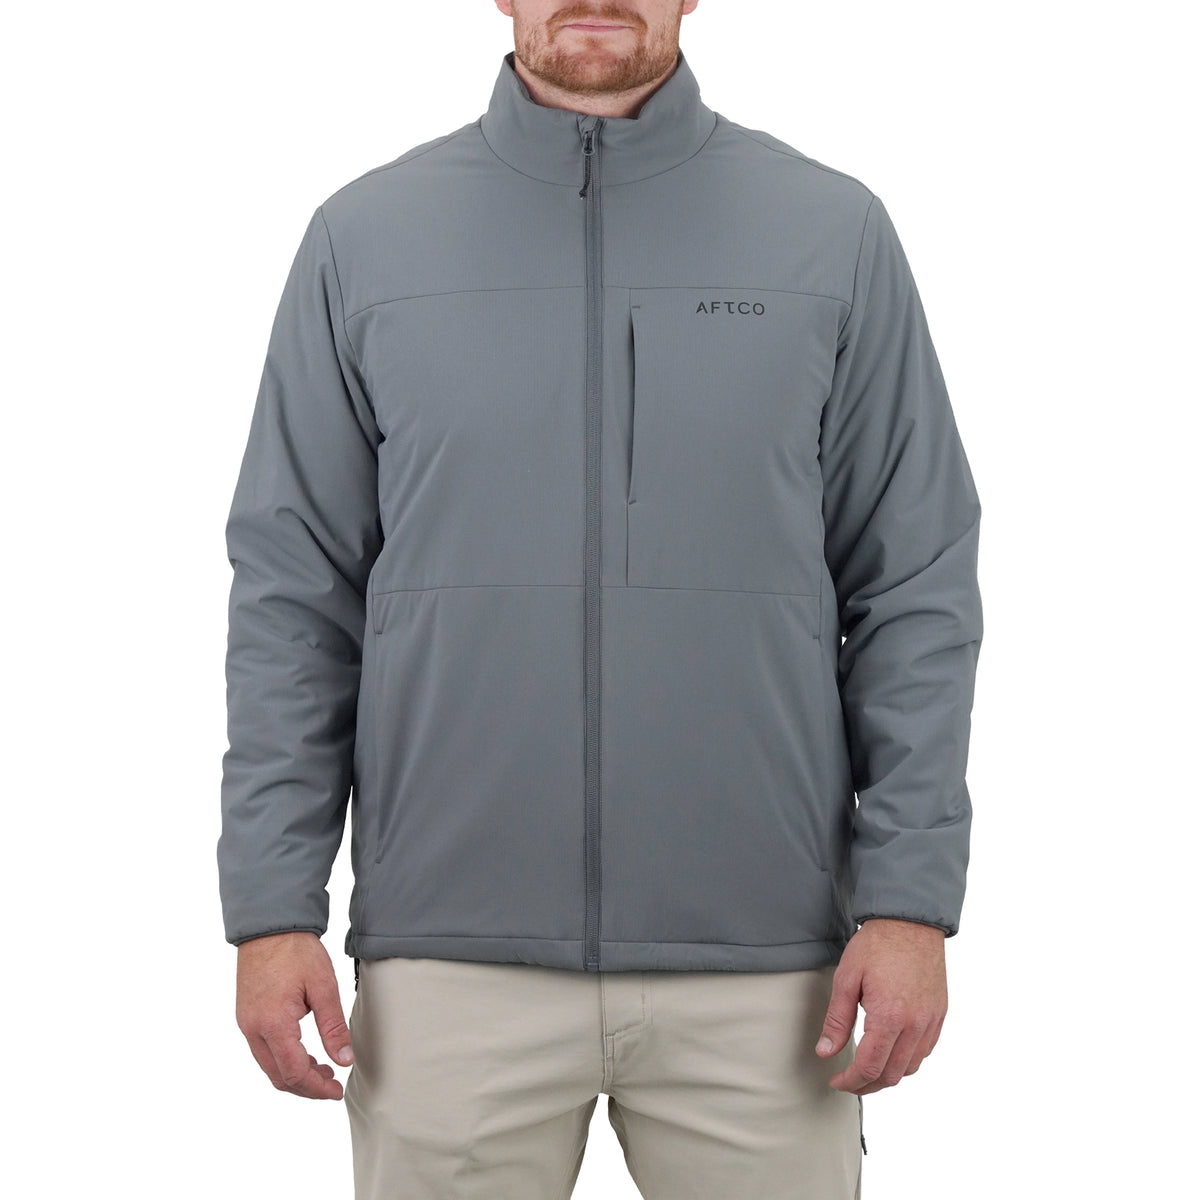 AFTCO Forge Insulated Jacket